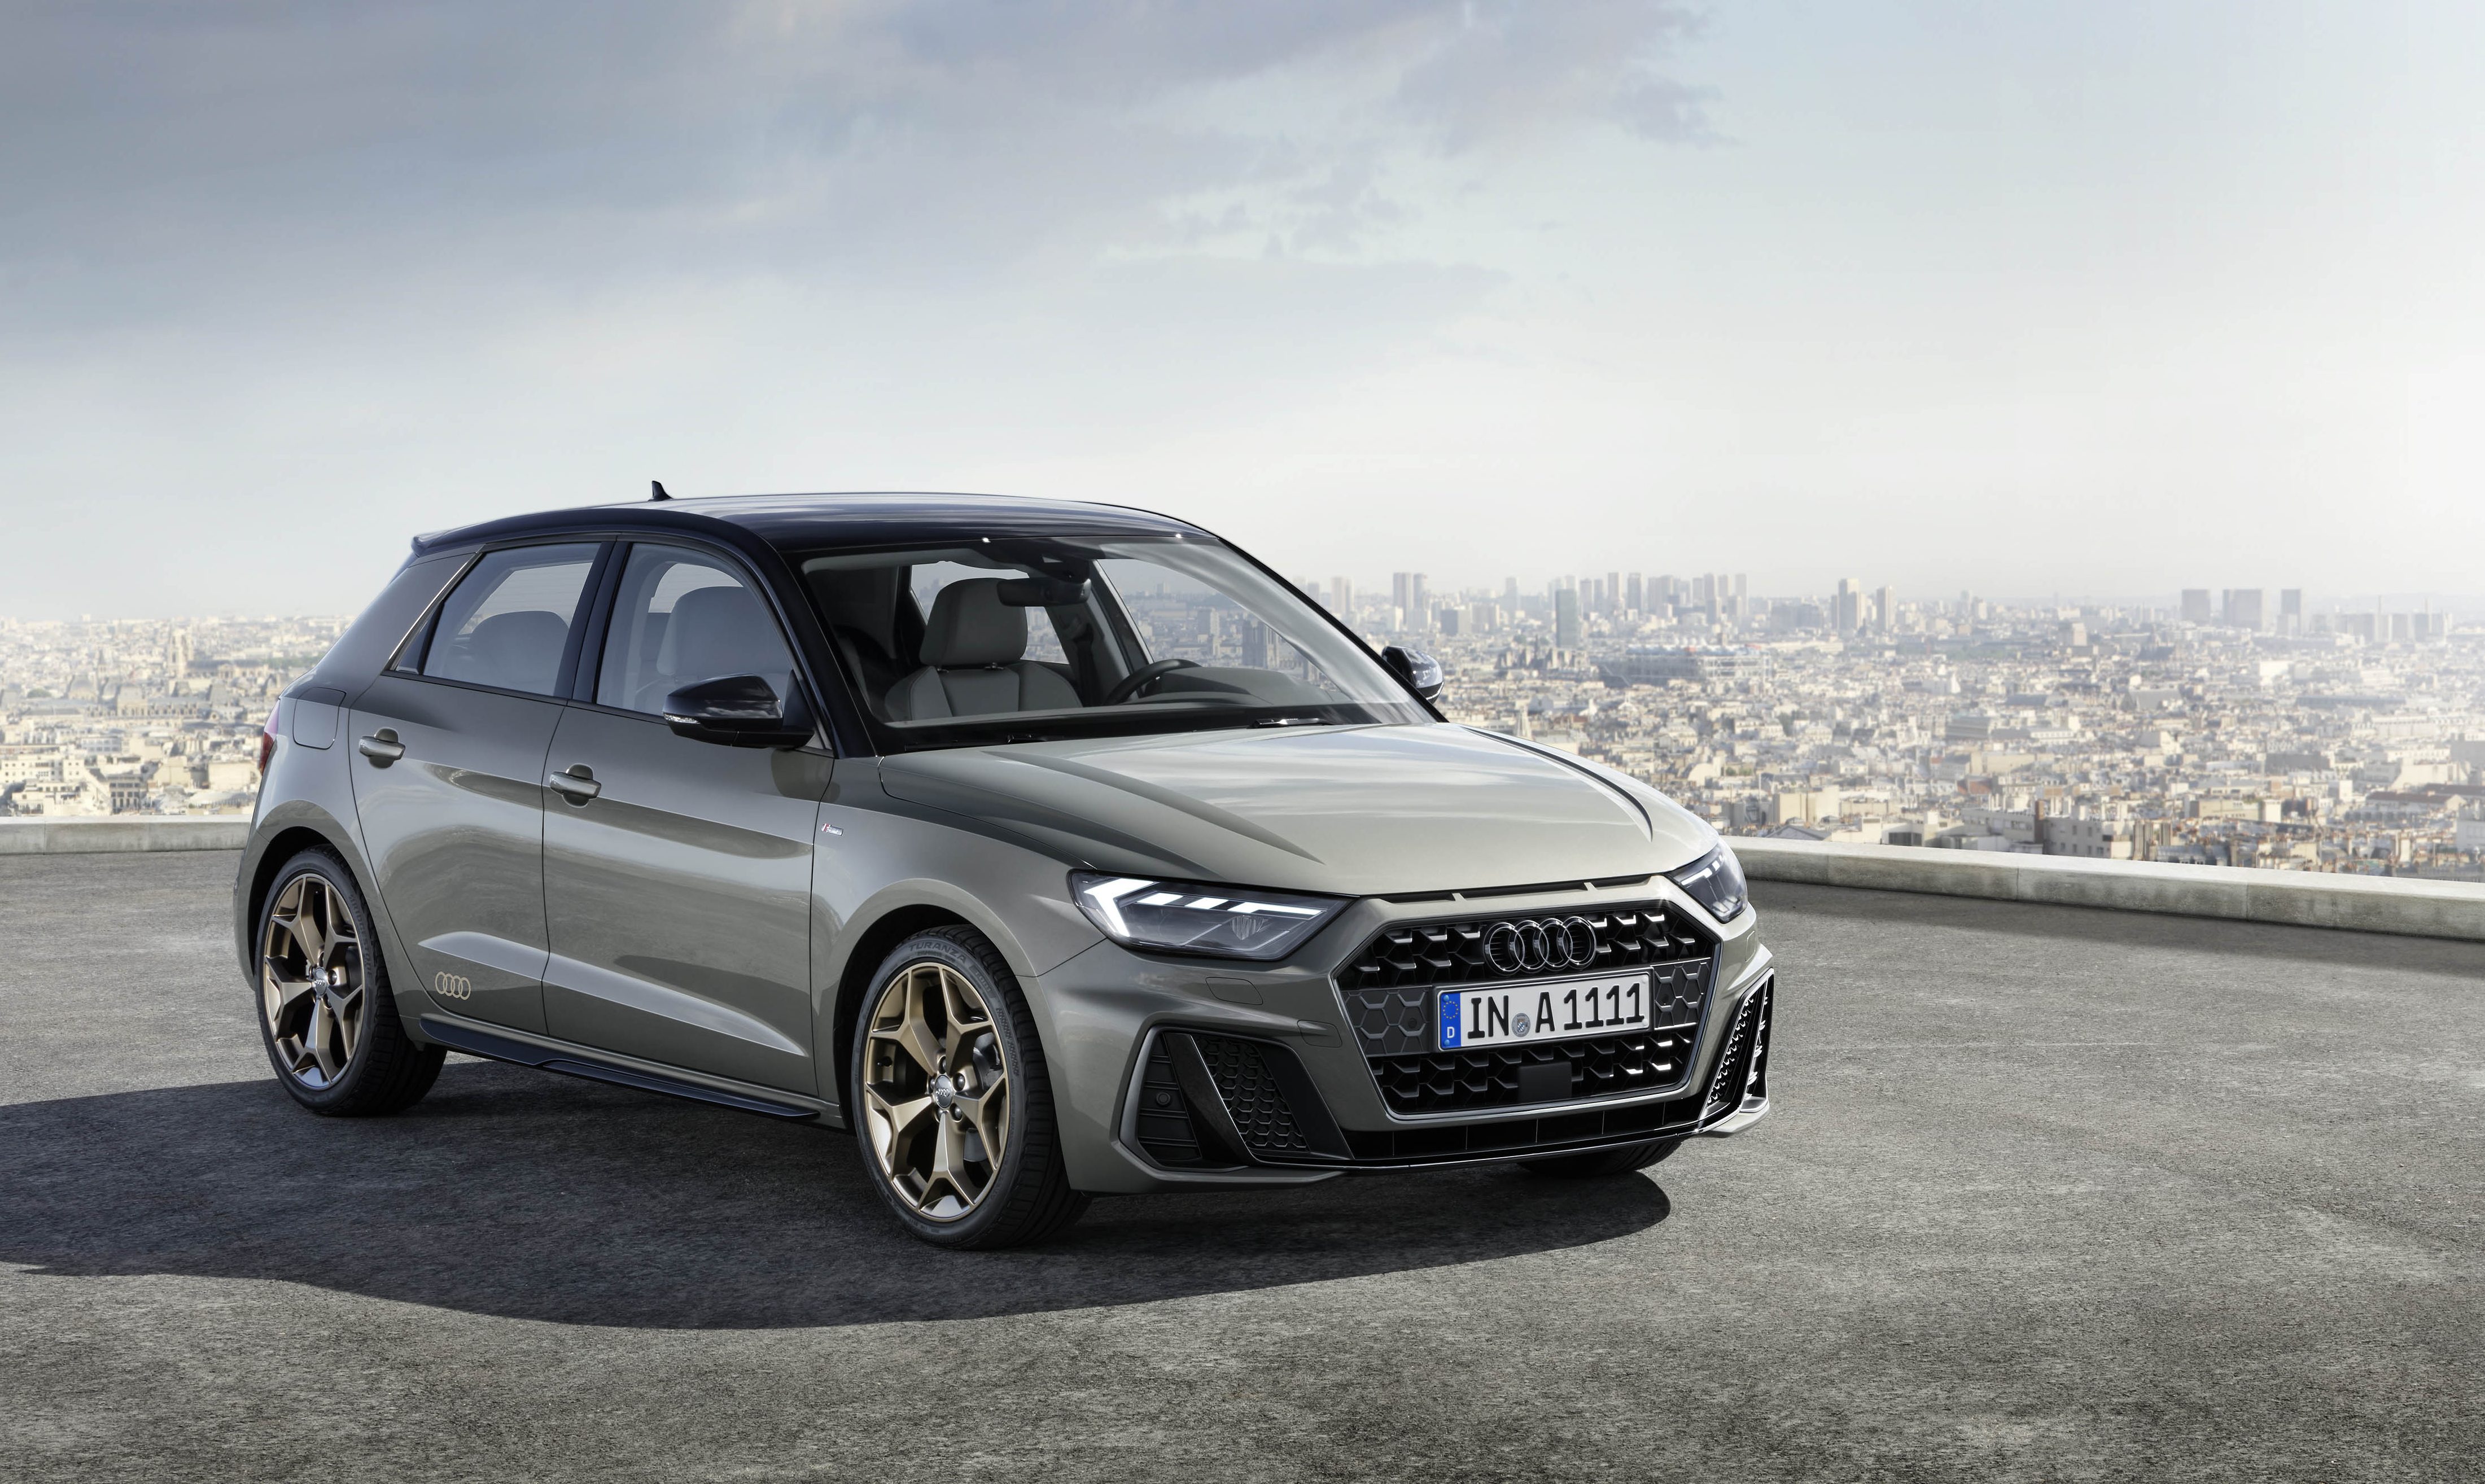 Audi A1 Price in Pakistan, Images, Reviews & Specs